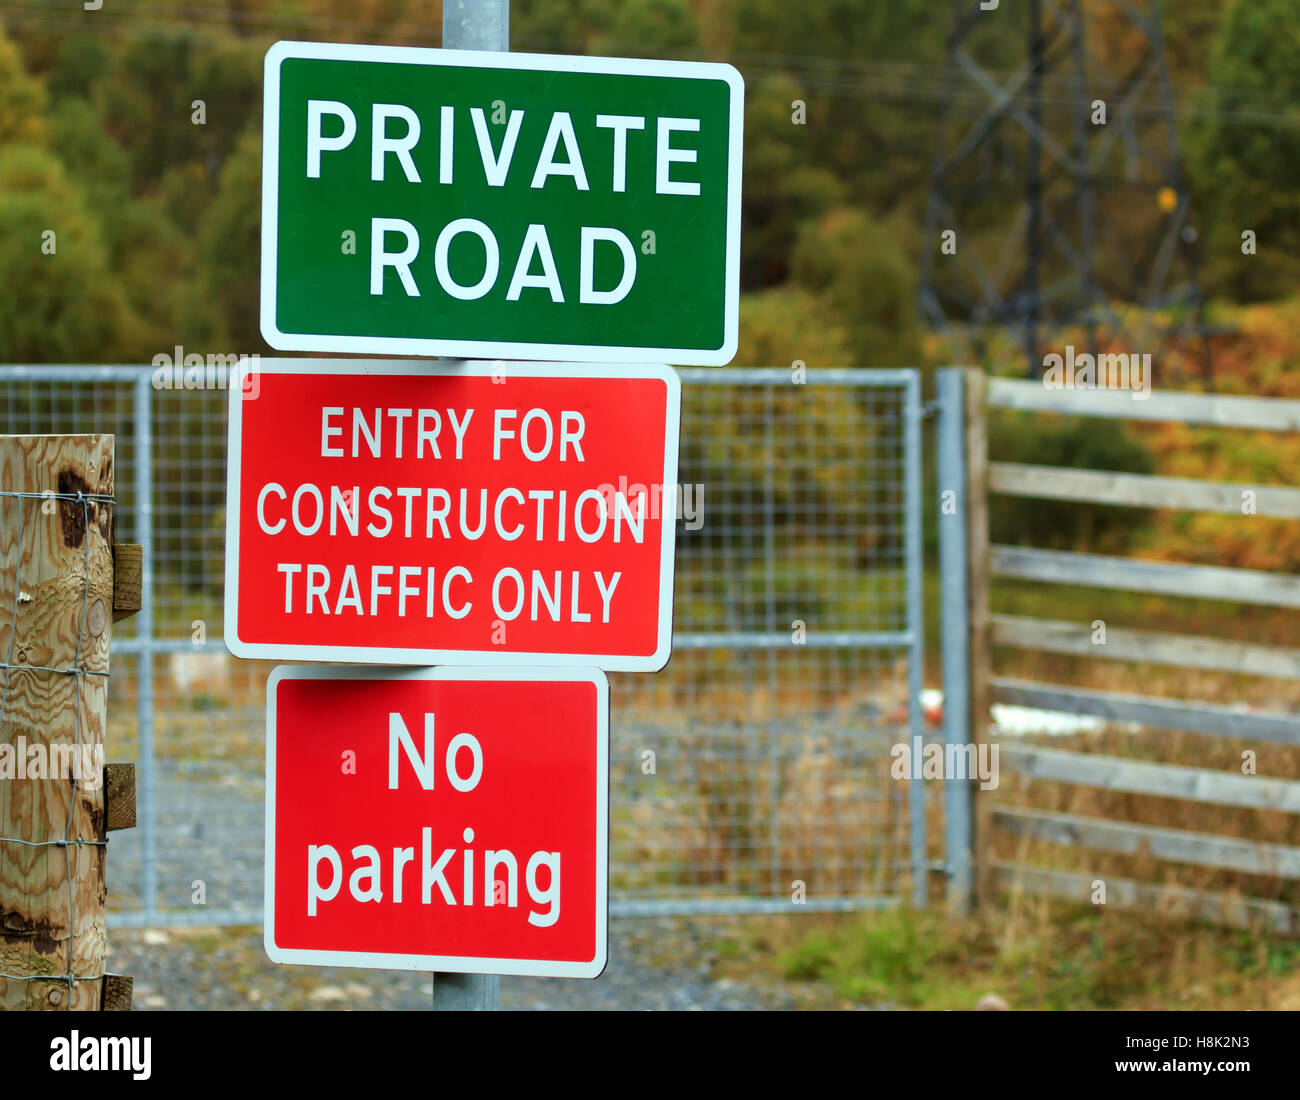 Three signs on one post for Private Road, No Parking and Entry for construction traffic only Stock Photo